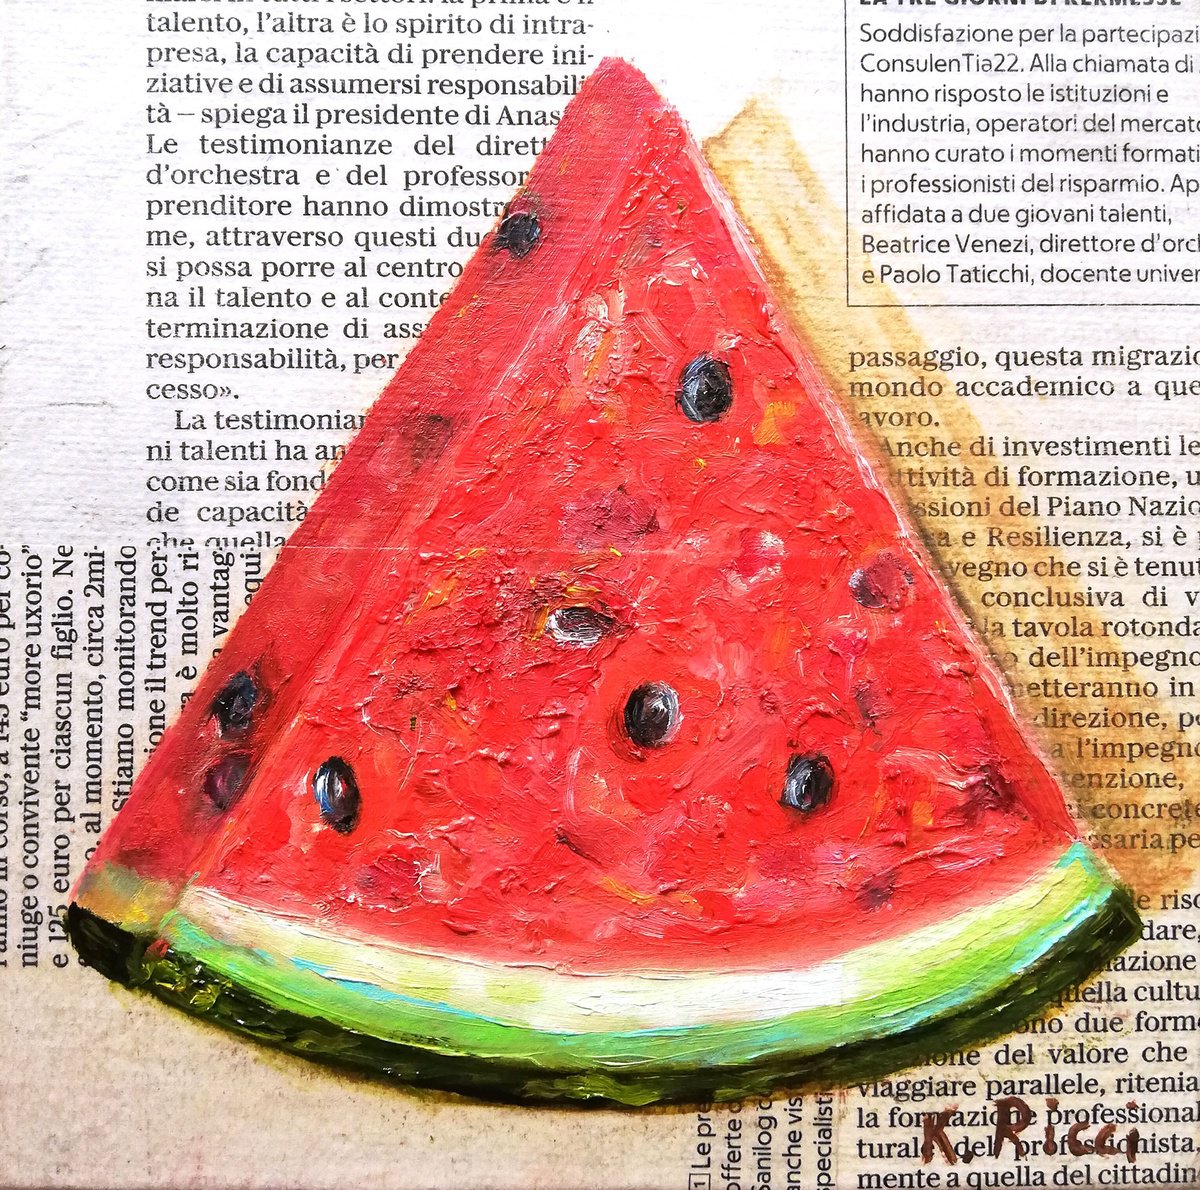 A Slice of Watermelon on Newspaper Original Oil on Canvas Board Painting 6 by 6 inches ( by Katia Ricci